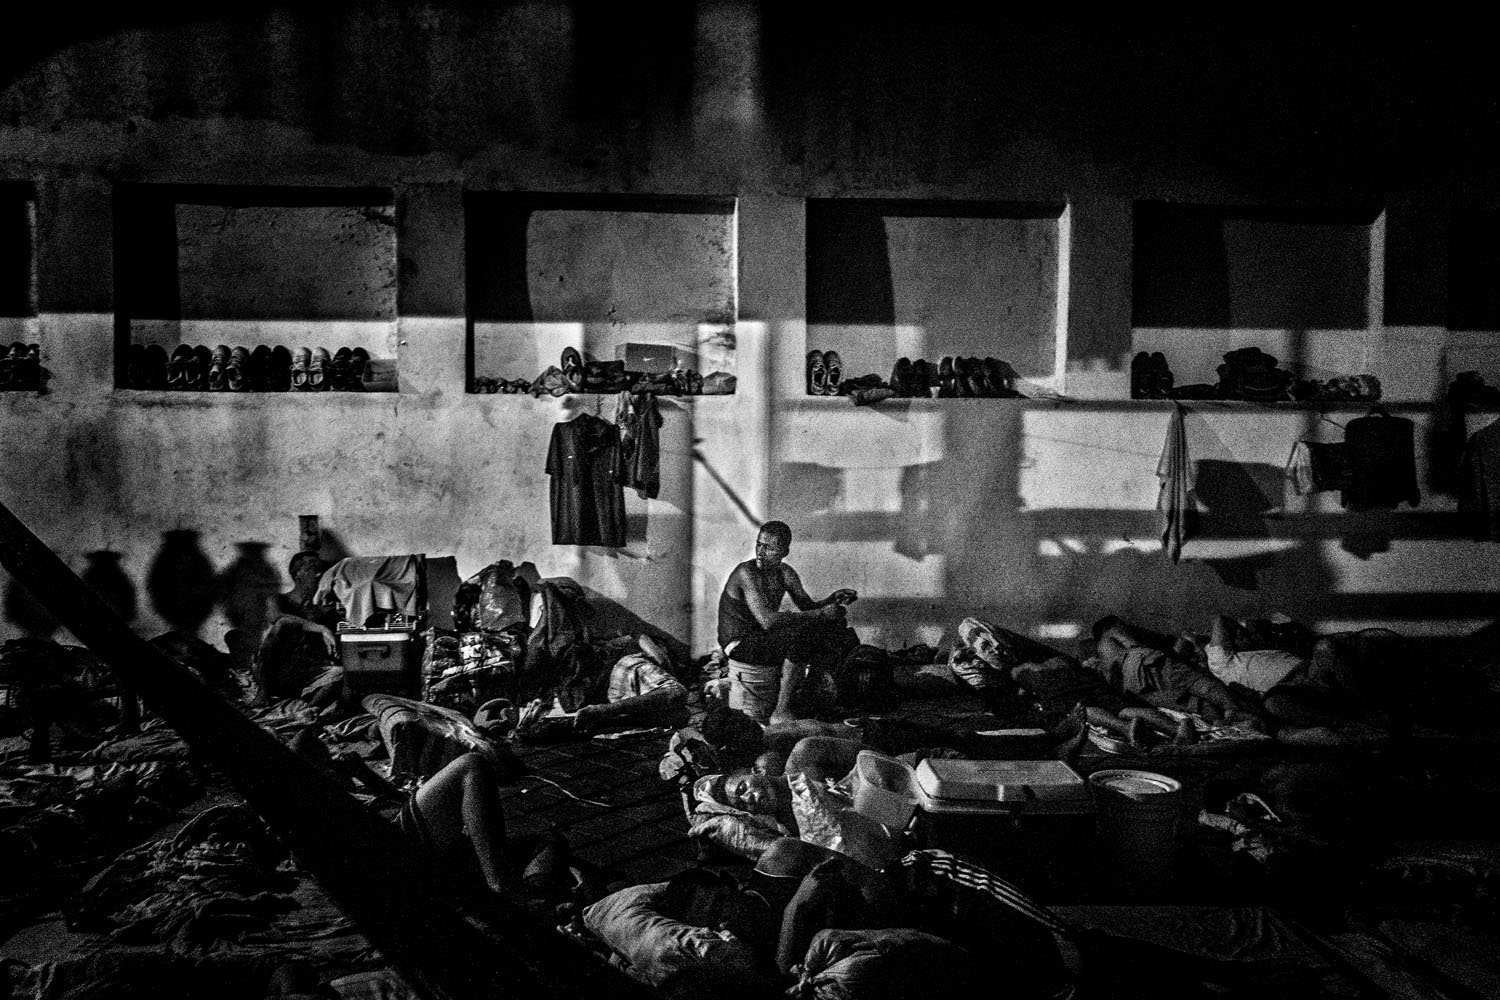 CIUDAD BOLIVAR, VENEZUELA - APRIL 2013: "La guerrilla". This is the name of this area of the prison. It is a section of excluded inmates, normally due his drug addiction. This is the prison population which is living in extreme conditions. Those who break the codes of coexistence are confined to this site. (Photo by Sebastián Liste/ Reportage by Getty Images)